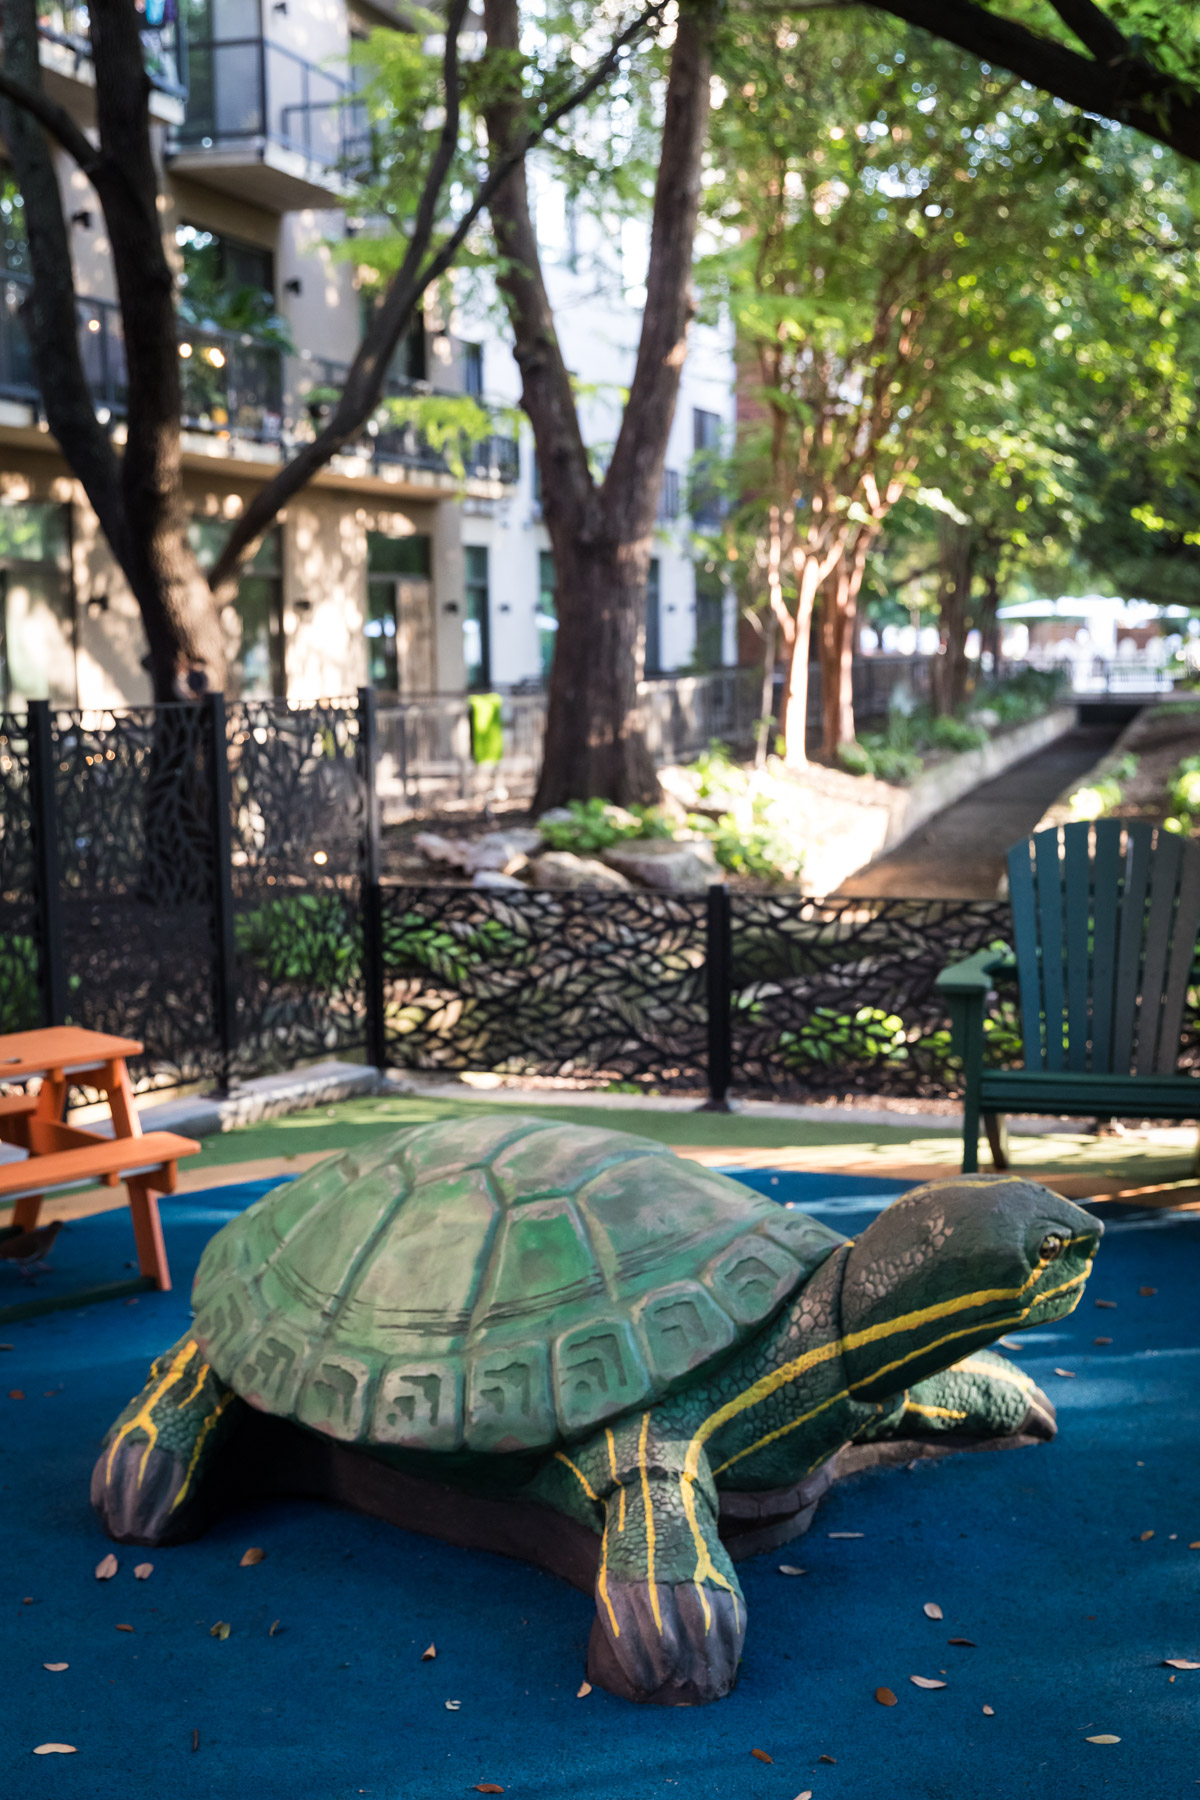 Turtle sculpture in playground in Yanaguana Garden in Hemisfair for an article on the perfect downtown San Antonio family portrait itinerary